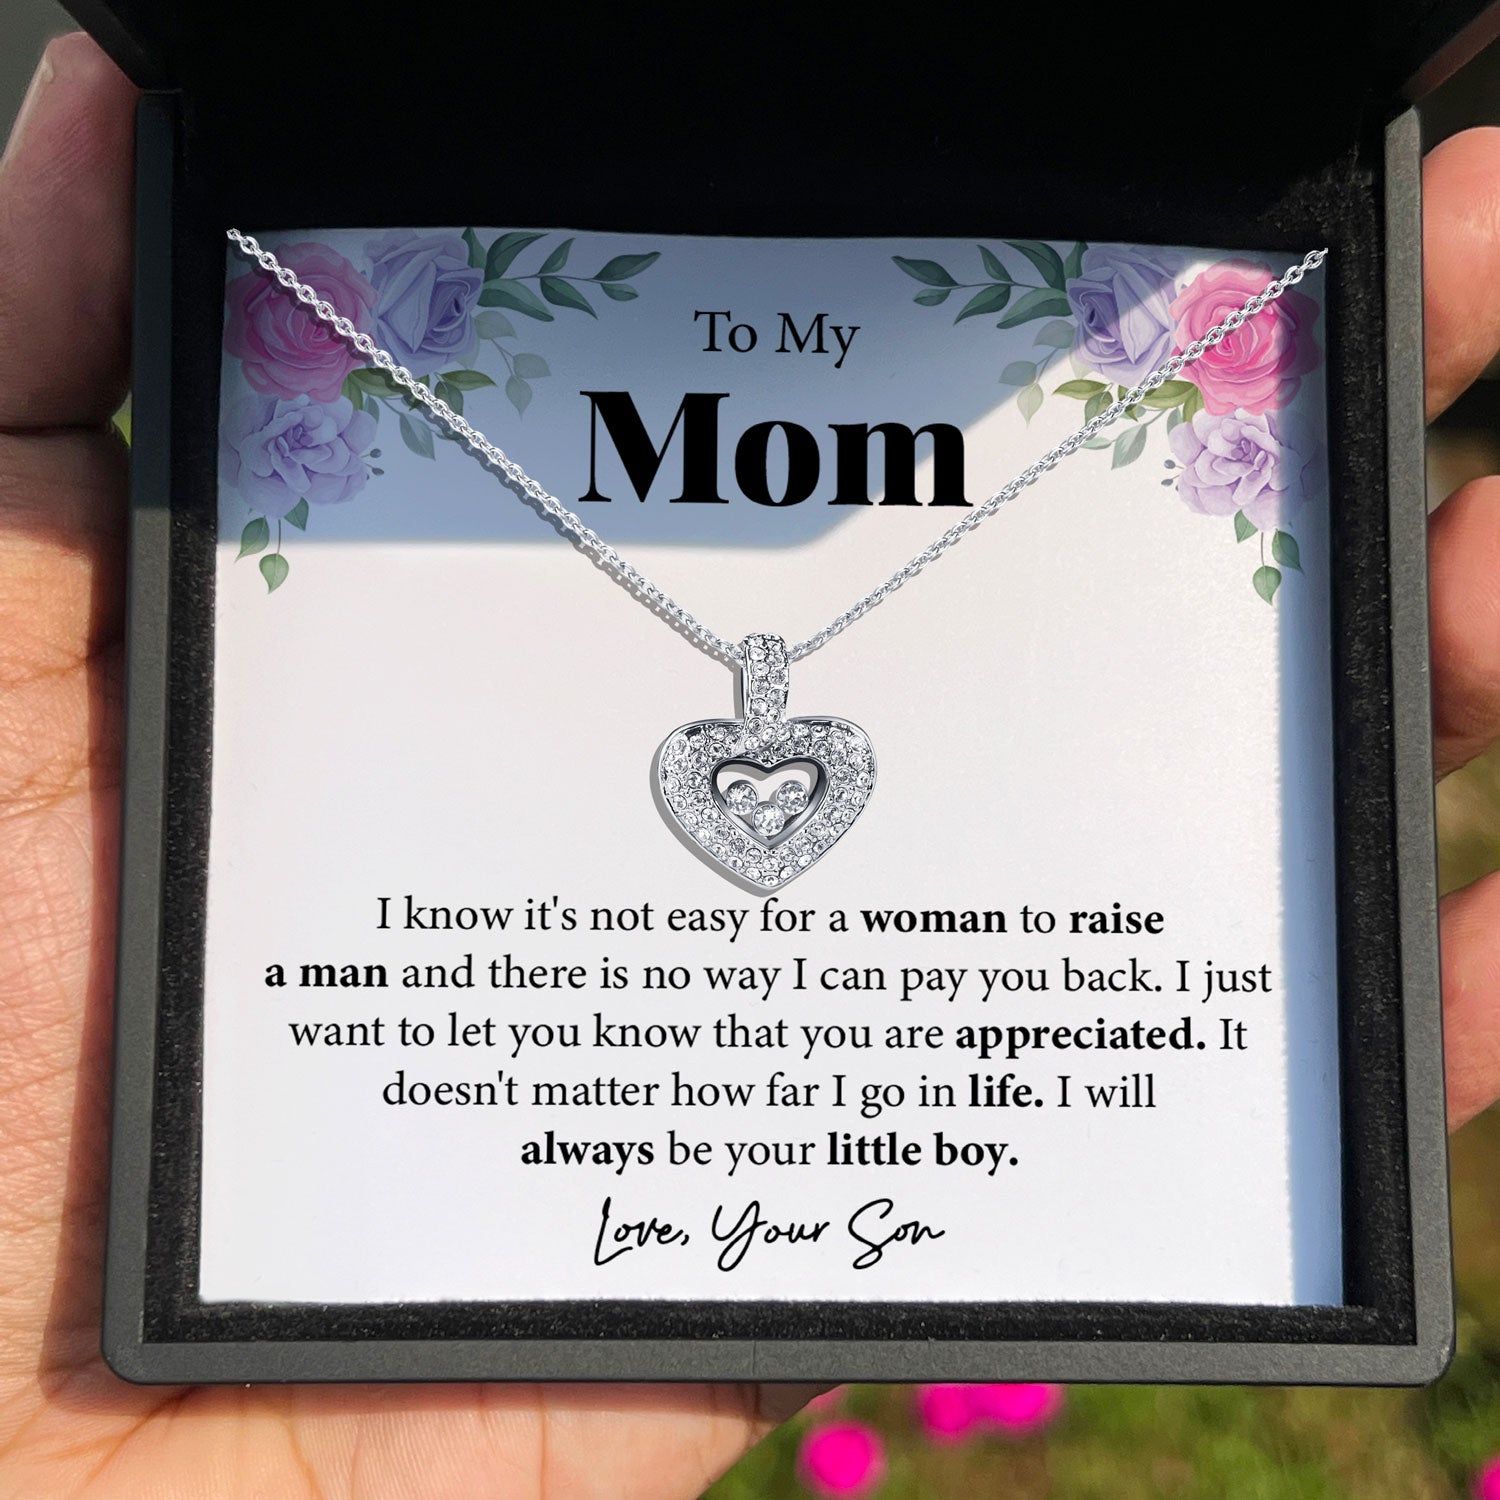 To My Mom - Love, Your Son - Tryndi Floating Heart Necklace